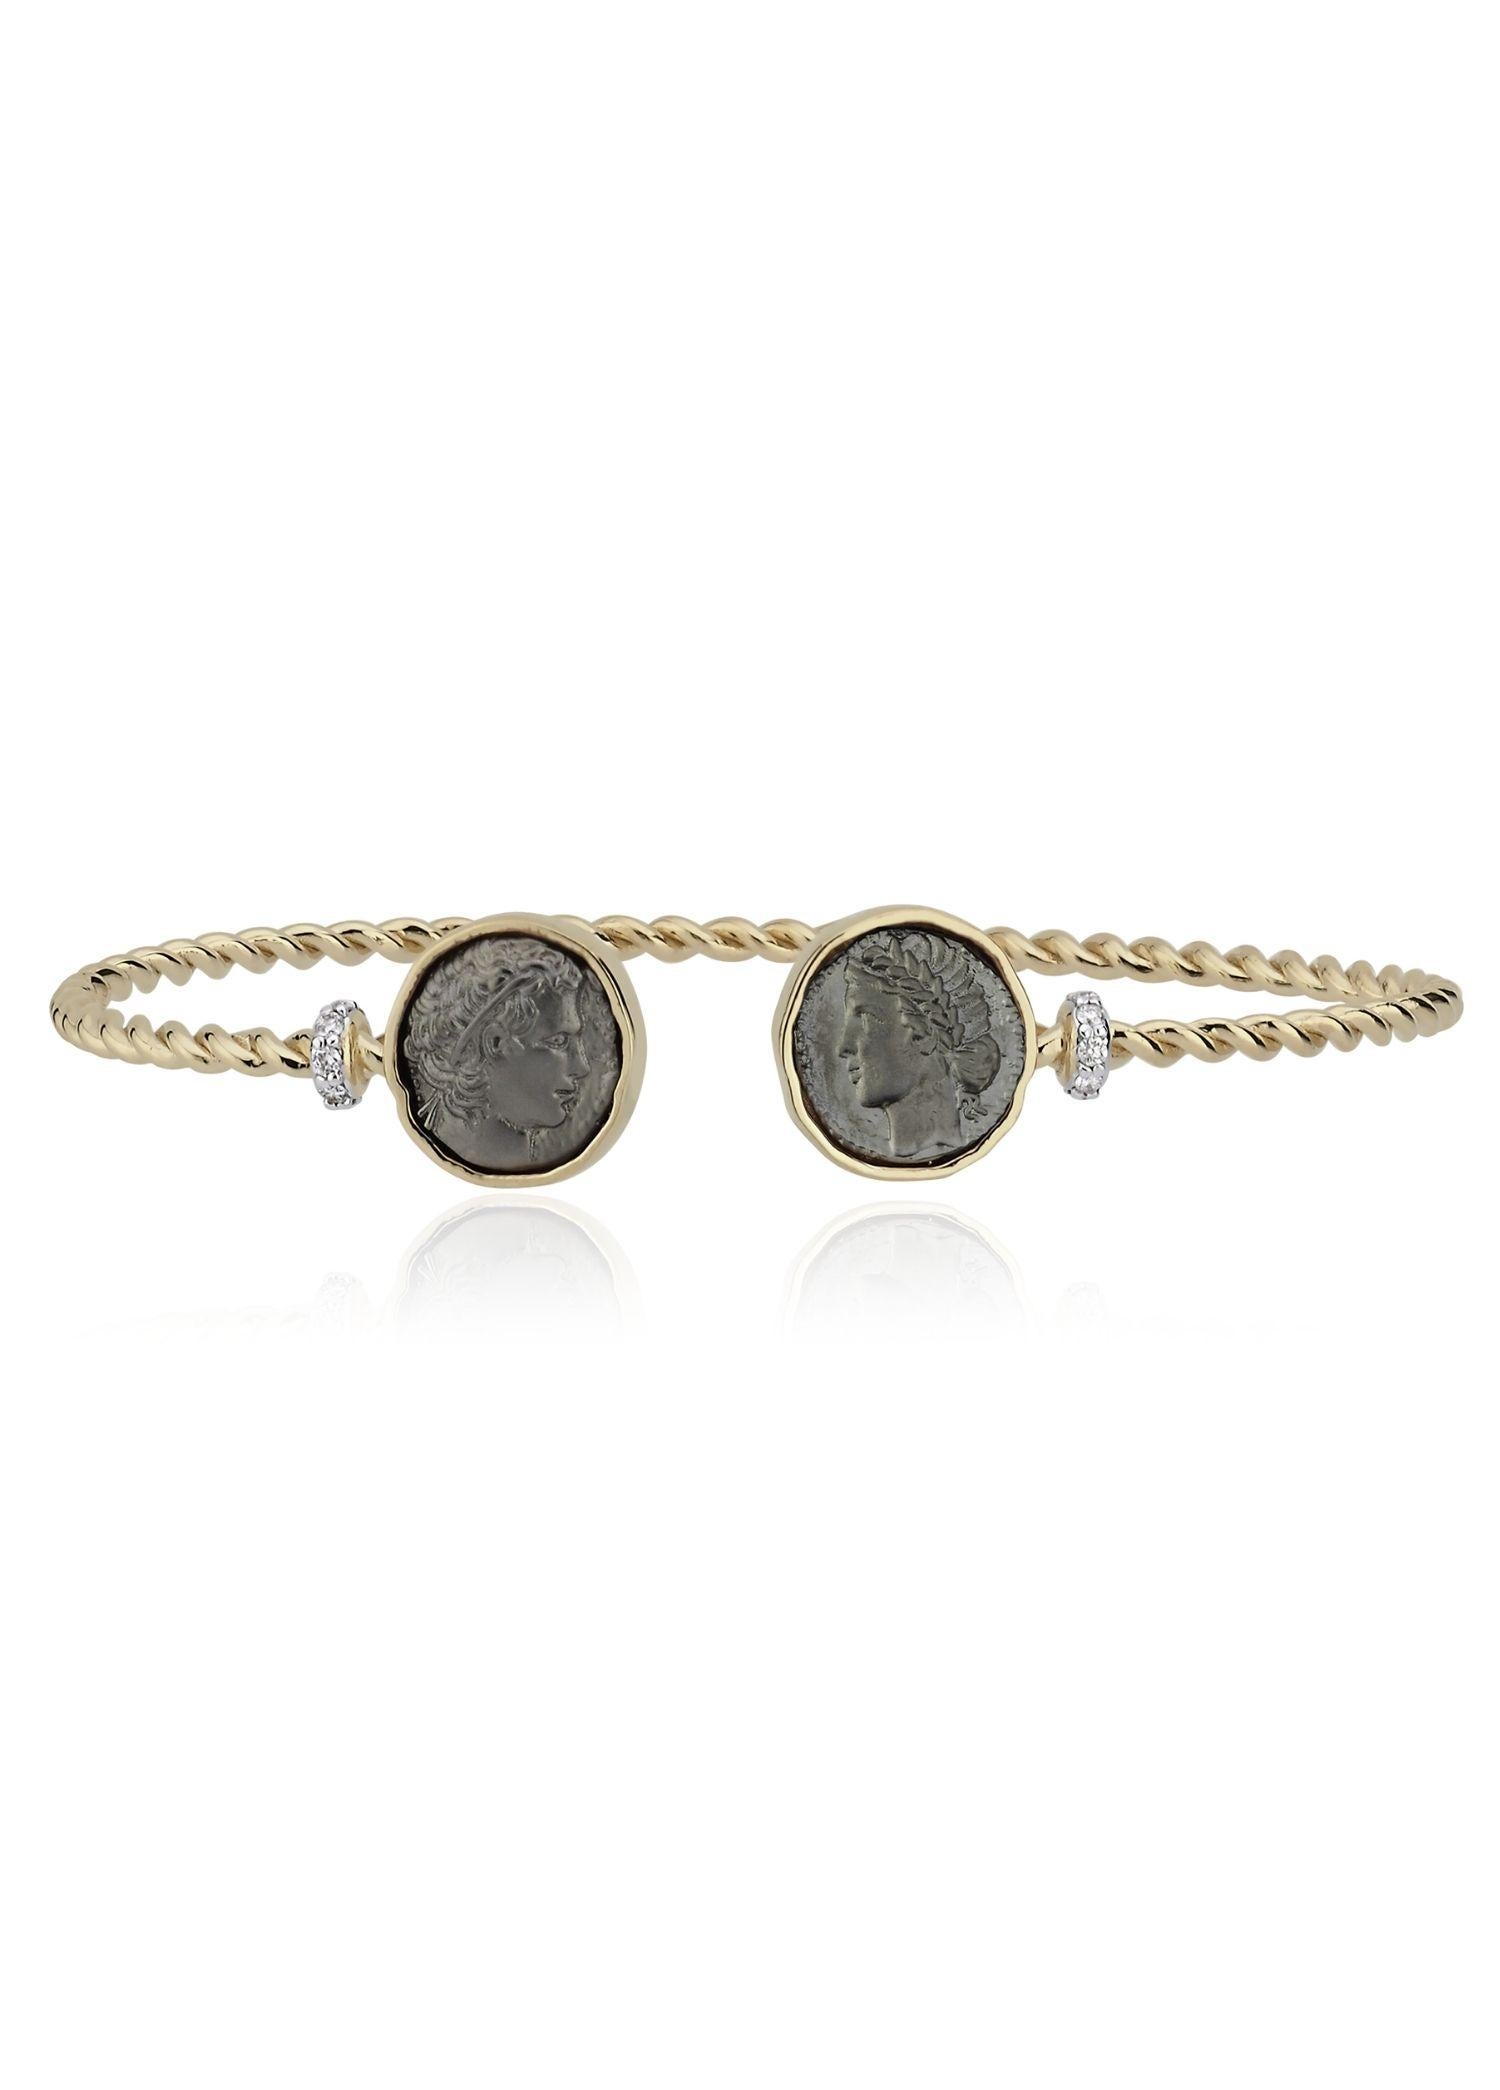 Melie Jewelry Cleopatra & Marcus Cuff Bracelet

14K Gold, 0.10 ct Diamond/G-VS, 2,45 g Oxidized 925 Sterling Silver

The Story Behind
The collection inspired by one of William Shakespeare's most famous tragedies, 